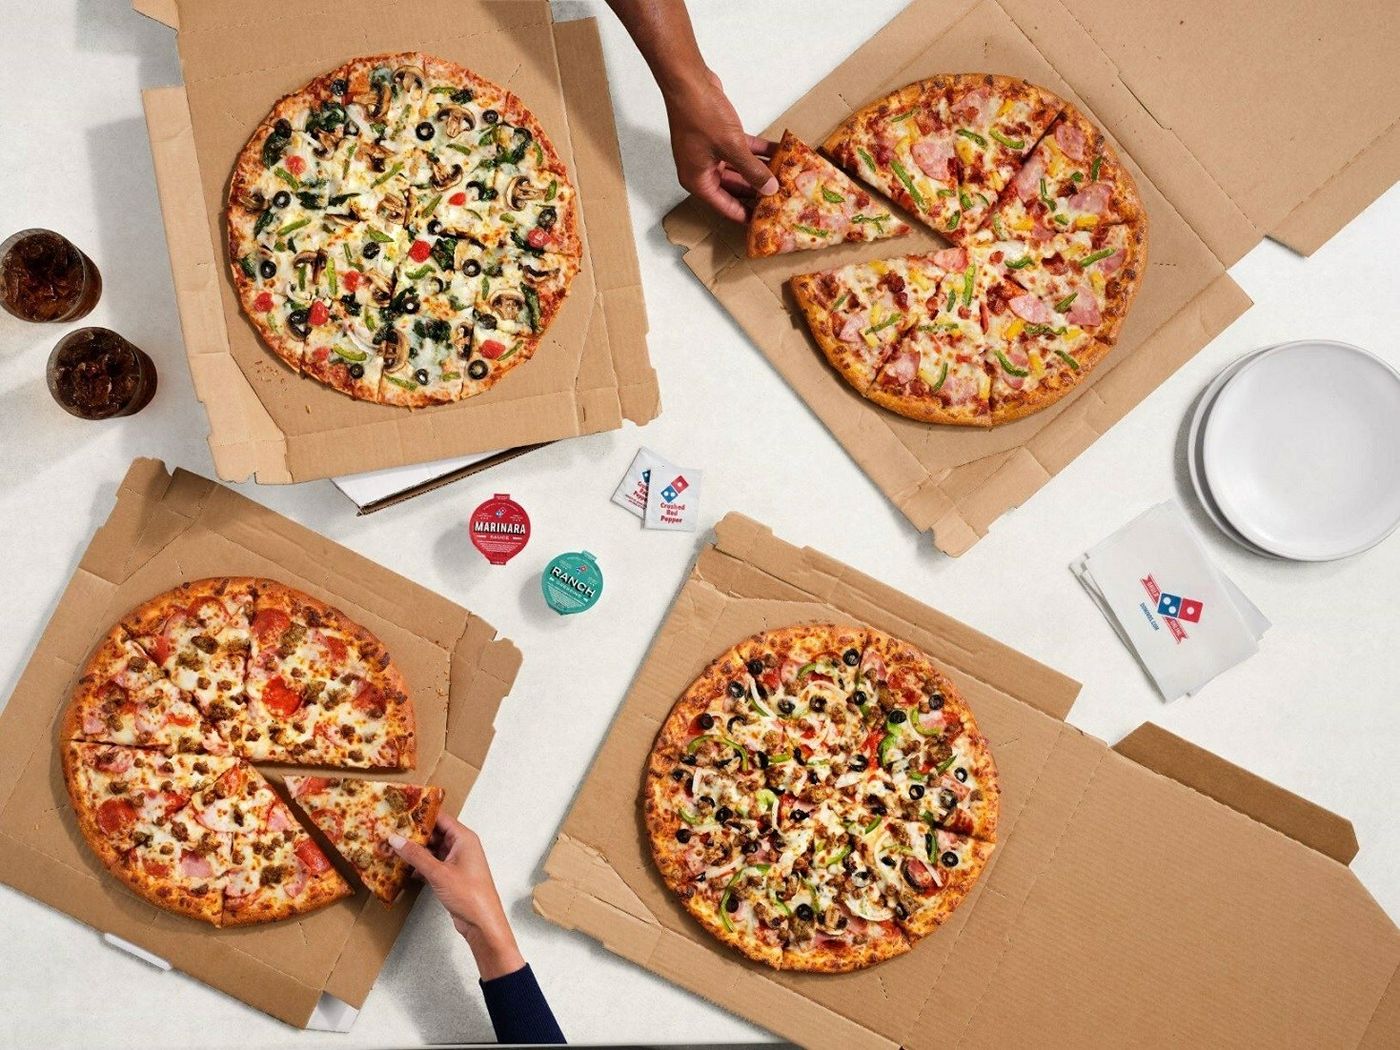 Hot Deal Alert: Domino's Pizza is 50% Off This Week!